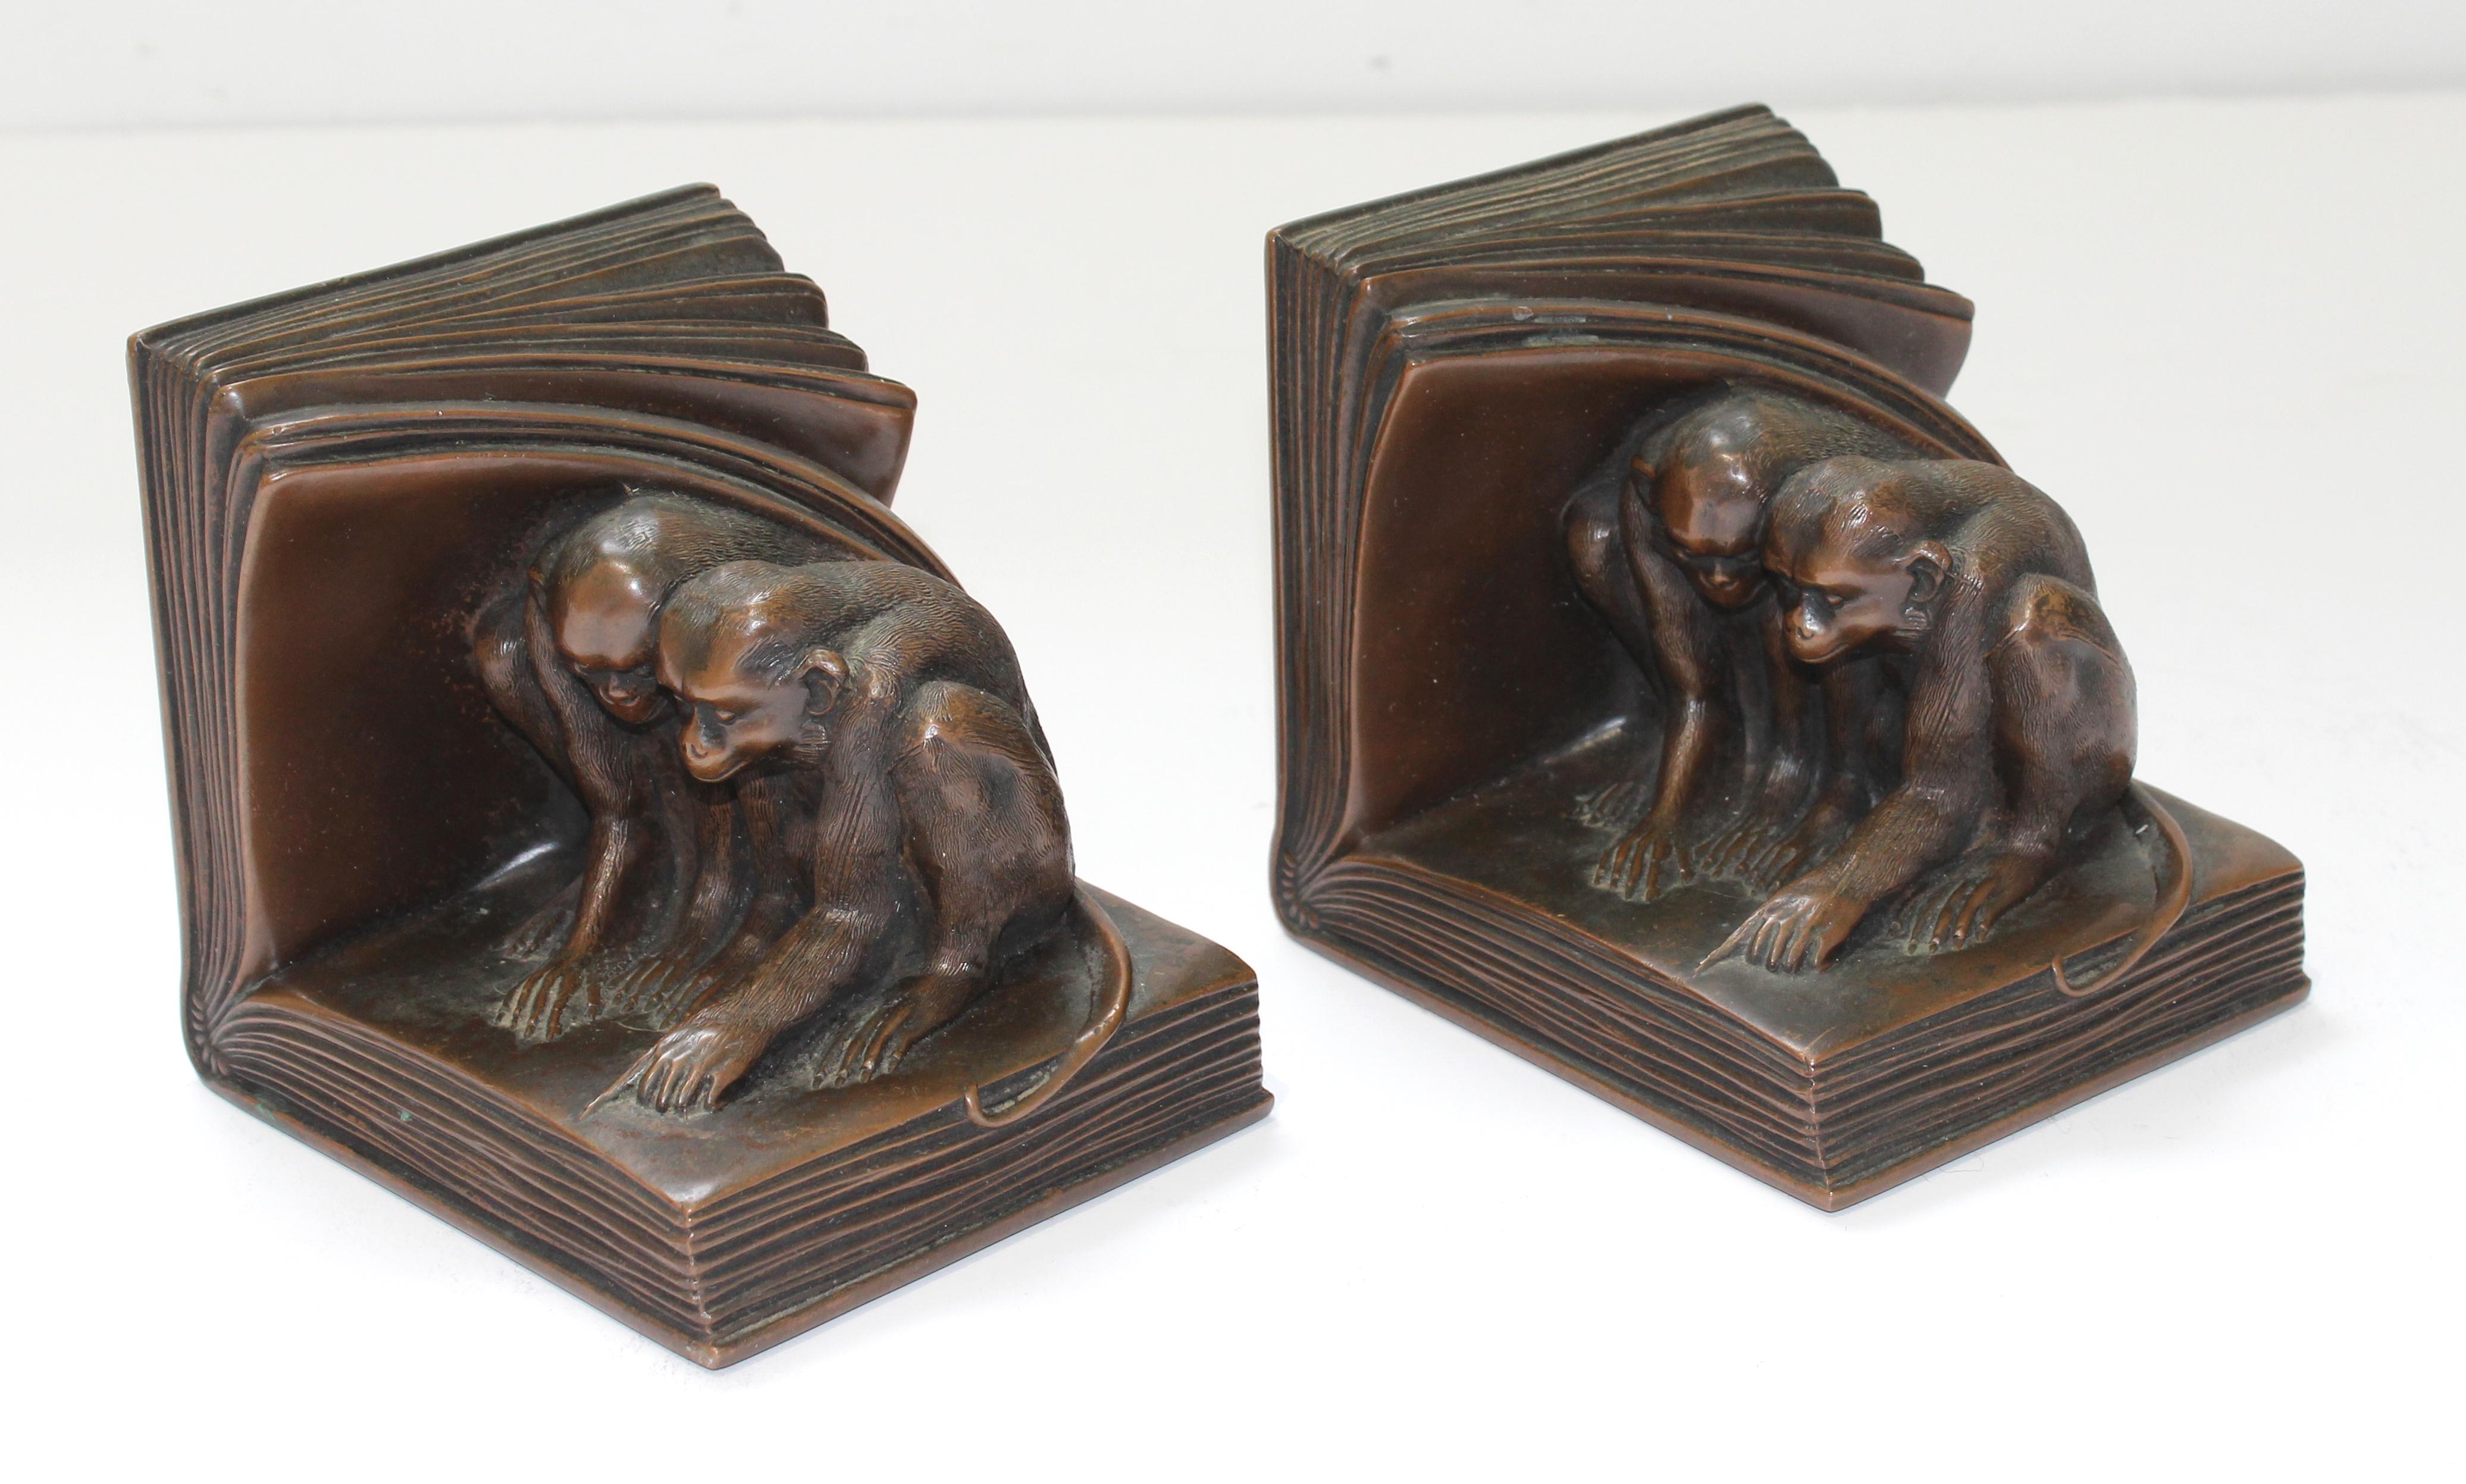 Vintage 1920s Jennings Brothers Bookends Art Deco Bronze Monkey Motif - the Pair - from a Palm Beach estate.

Charming Rare Jennings Brothers bookends featuring 2 monkeys sitting inside pages of an open book. One with eyes wide opened and a bit of